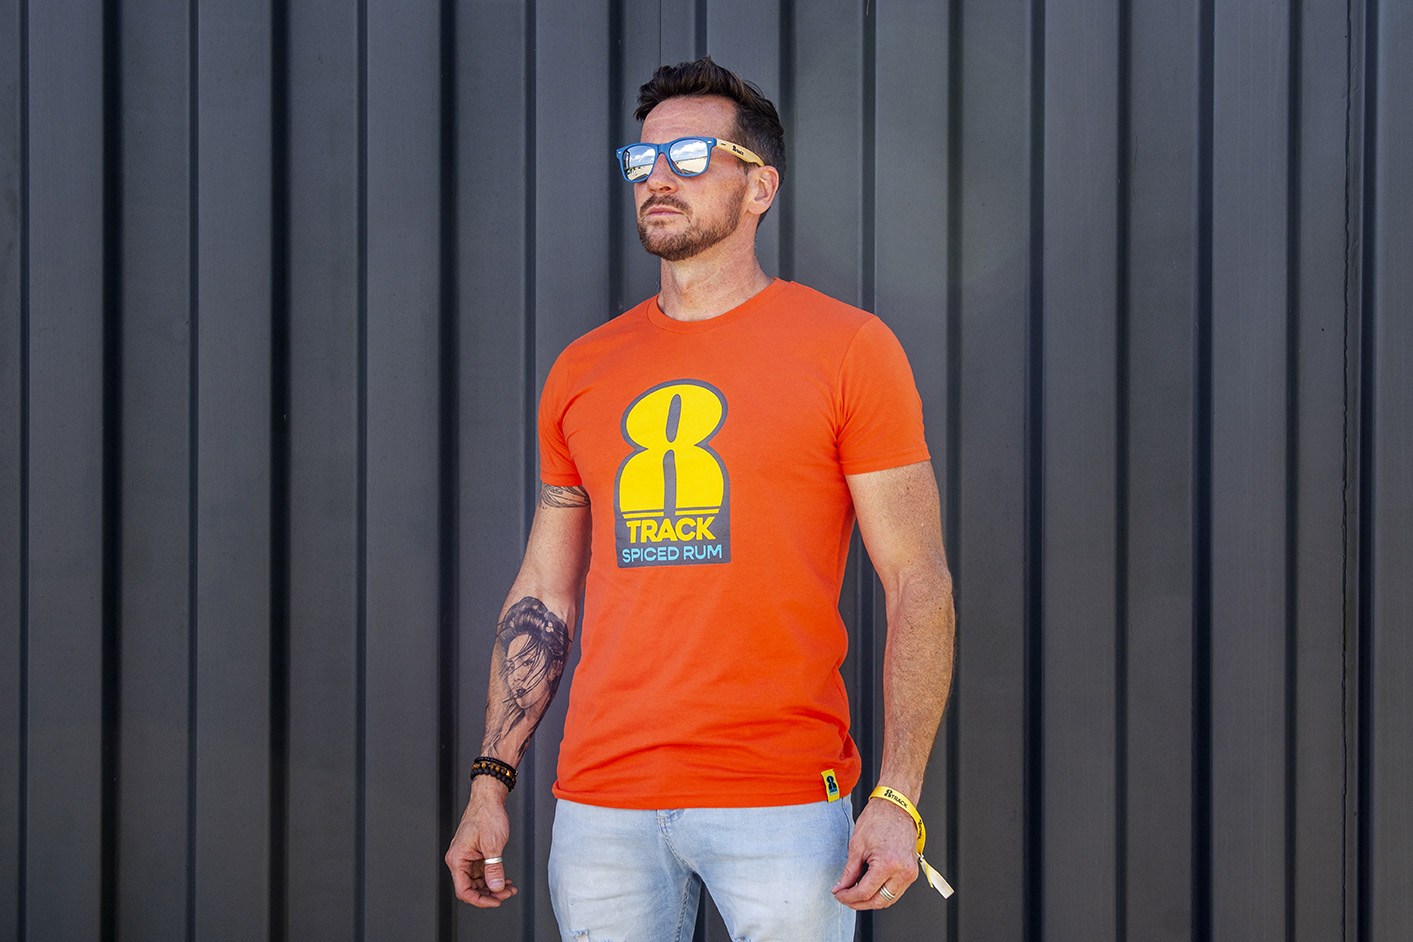 A male model stands in front of a dark grey panelled background in an orange 8Track t-shirt and 8Track mirrored sunglasses